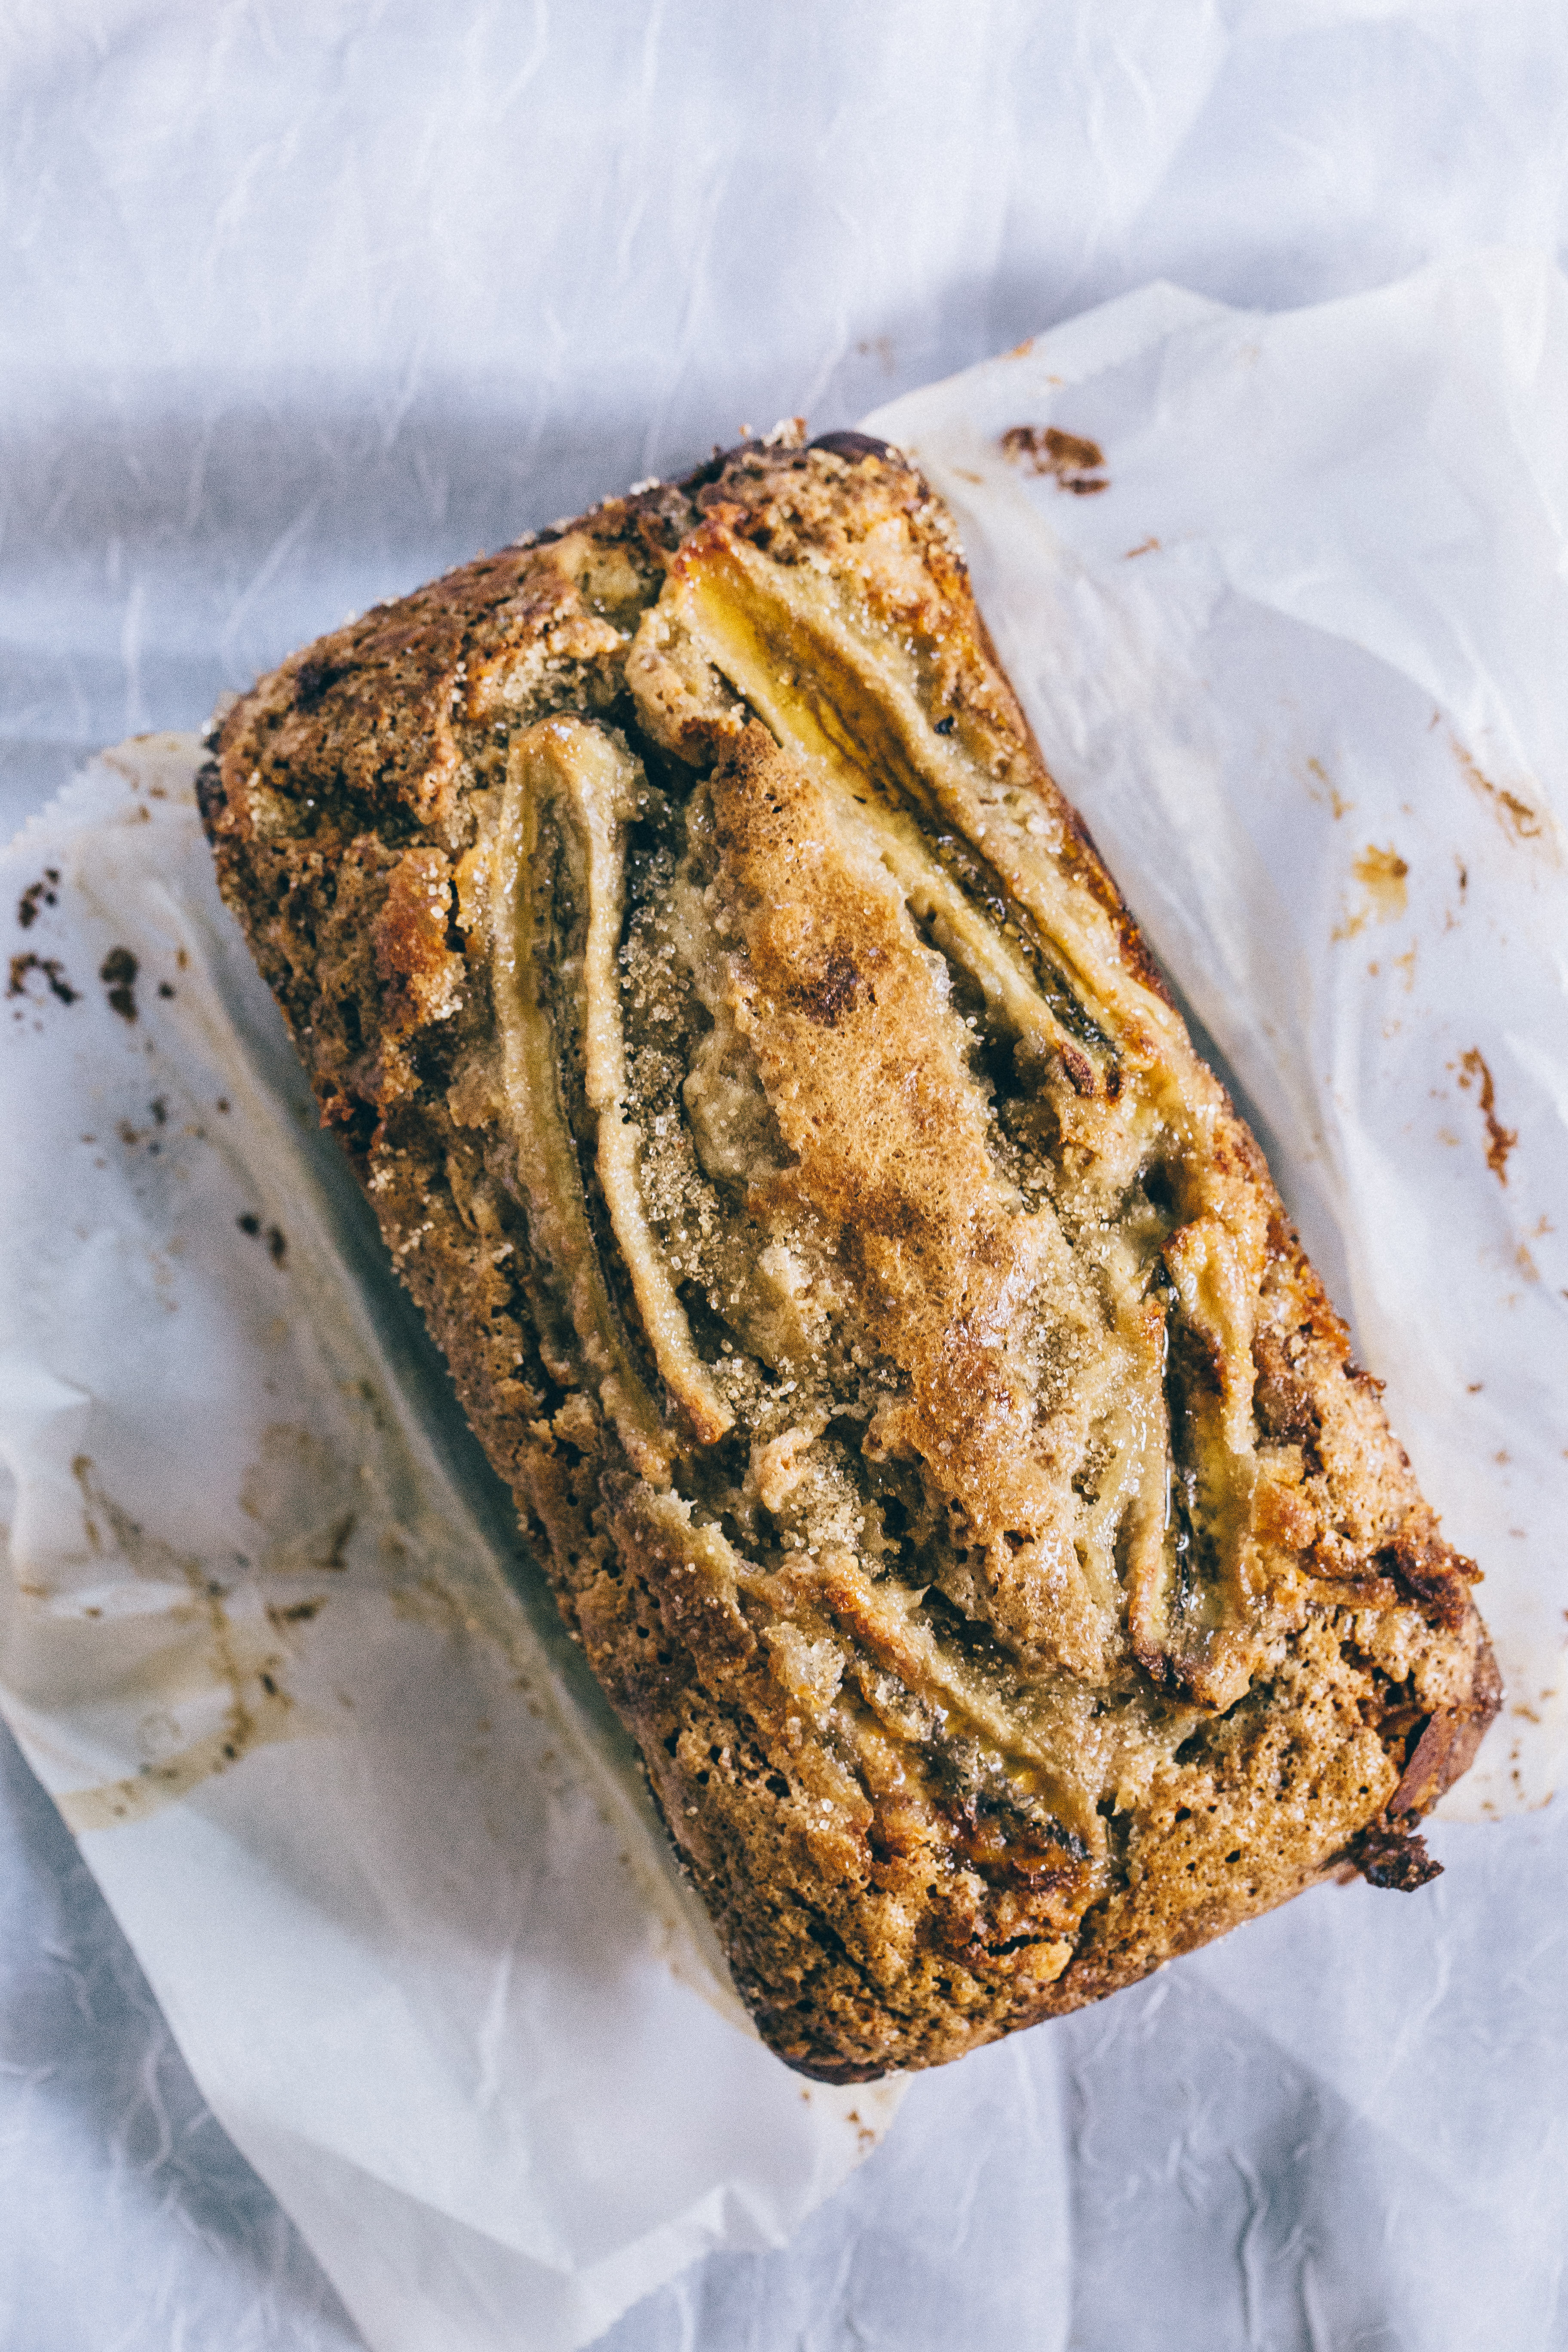 Best Banana Bread (with white chocolate and toffee)